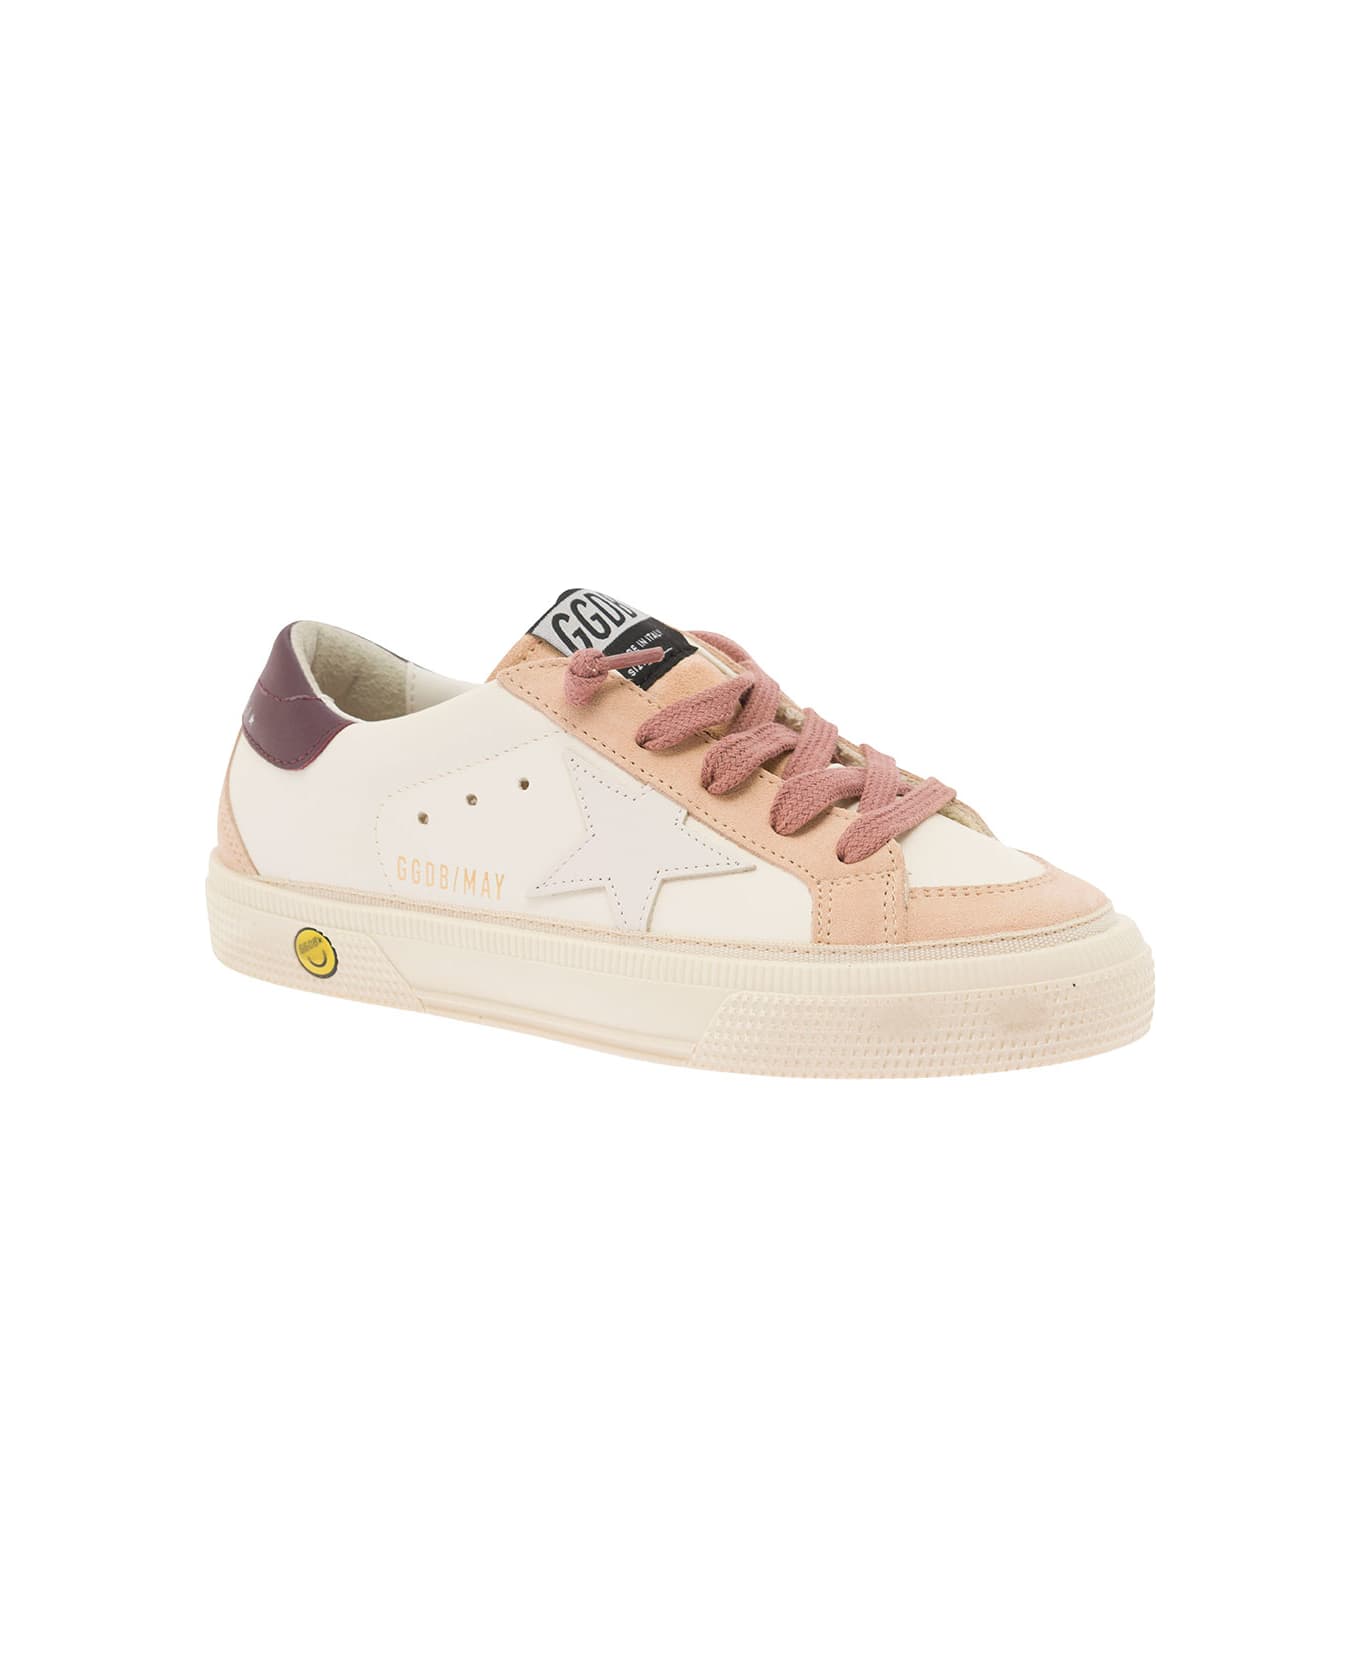 Golden Goose May Leather Upper Star And Heel Suede Toe And Spur Include Il Codice Gyf00604 | F004879 -82413 Dal 28 Al 35 - Beige シューズ